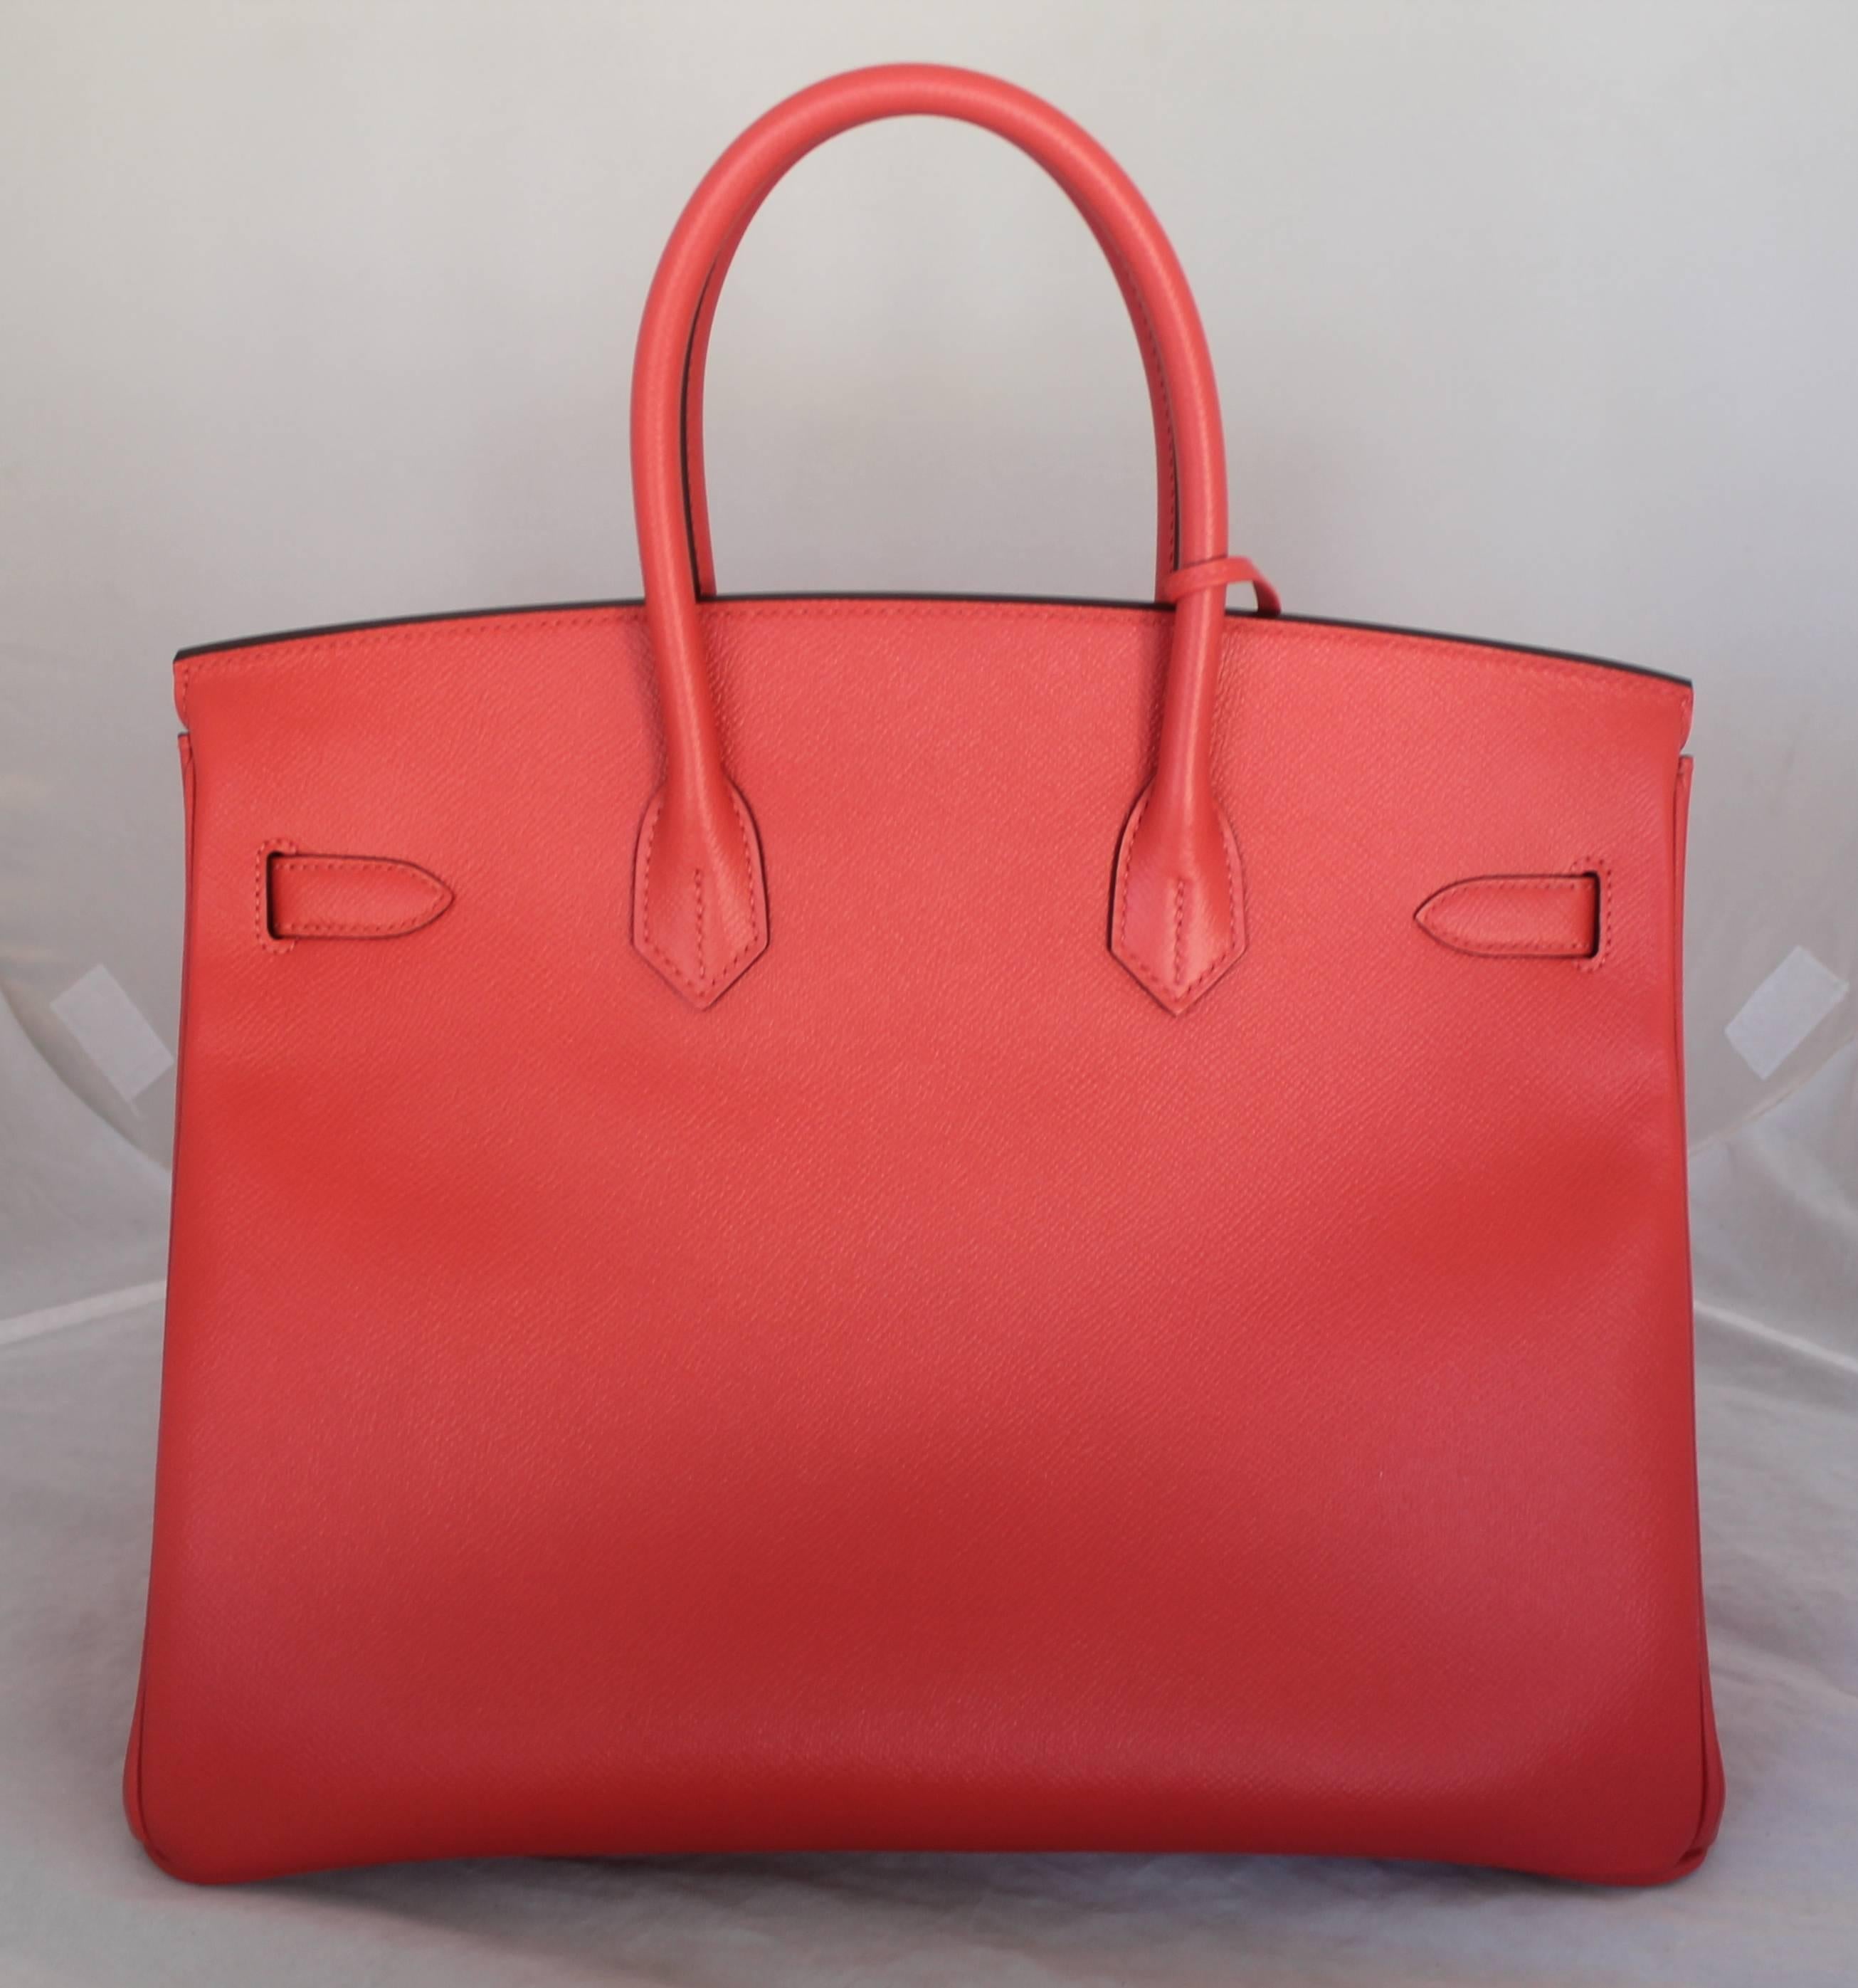 Hermes New with Tags Rouge Jaipur Epsom 35 cm Birkin Bag - GHW - 2015. This beautiful bag is new and has never been worn. The tags are still hanging and there is still plastic on the hardware. The bag is the perfect pop of color for spring & summer